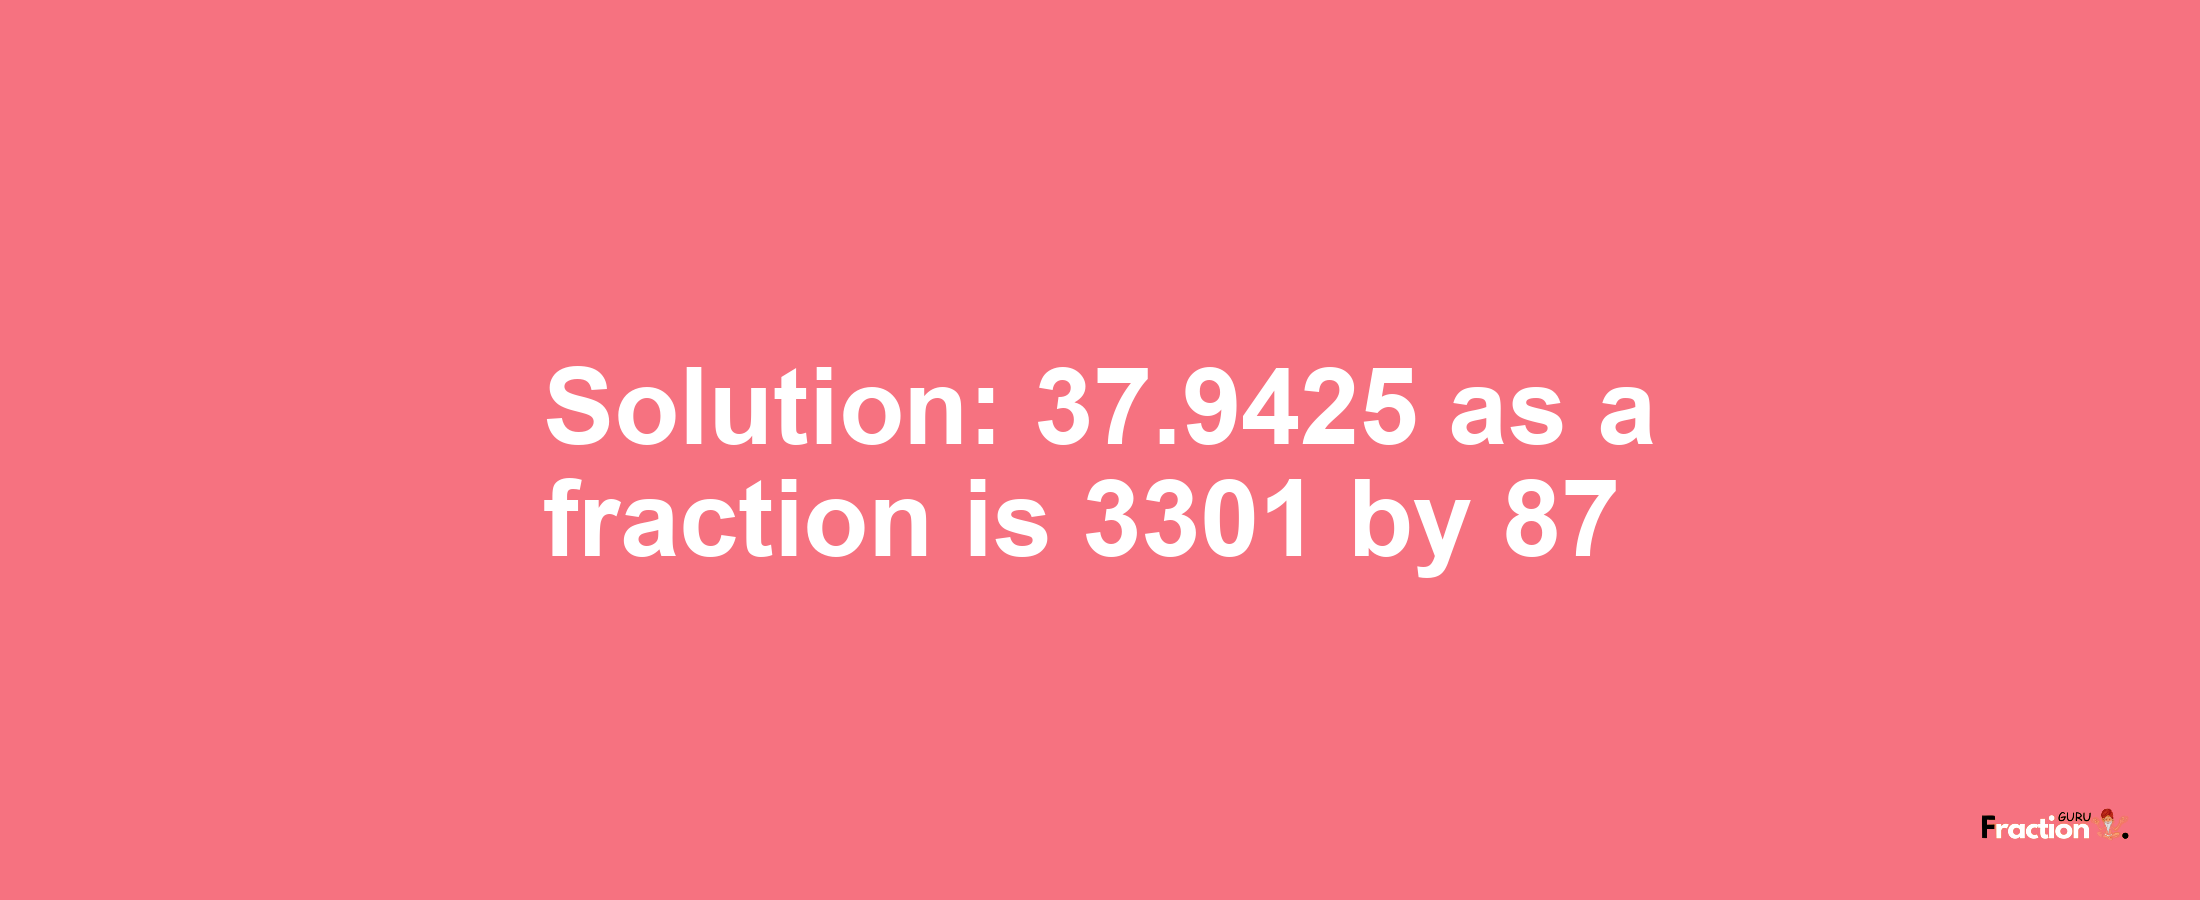 Solution:37.9425 as a fraction is 3301/87